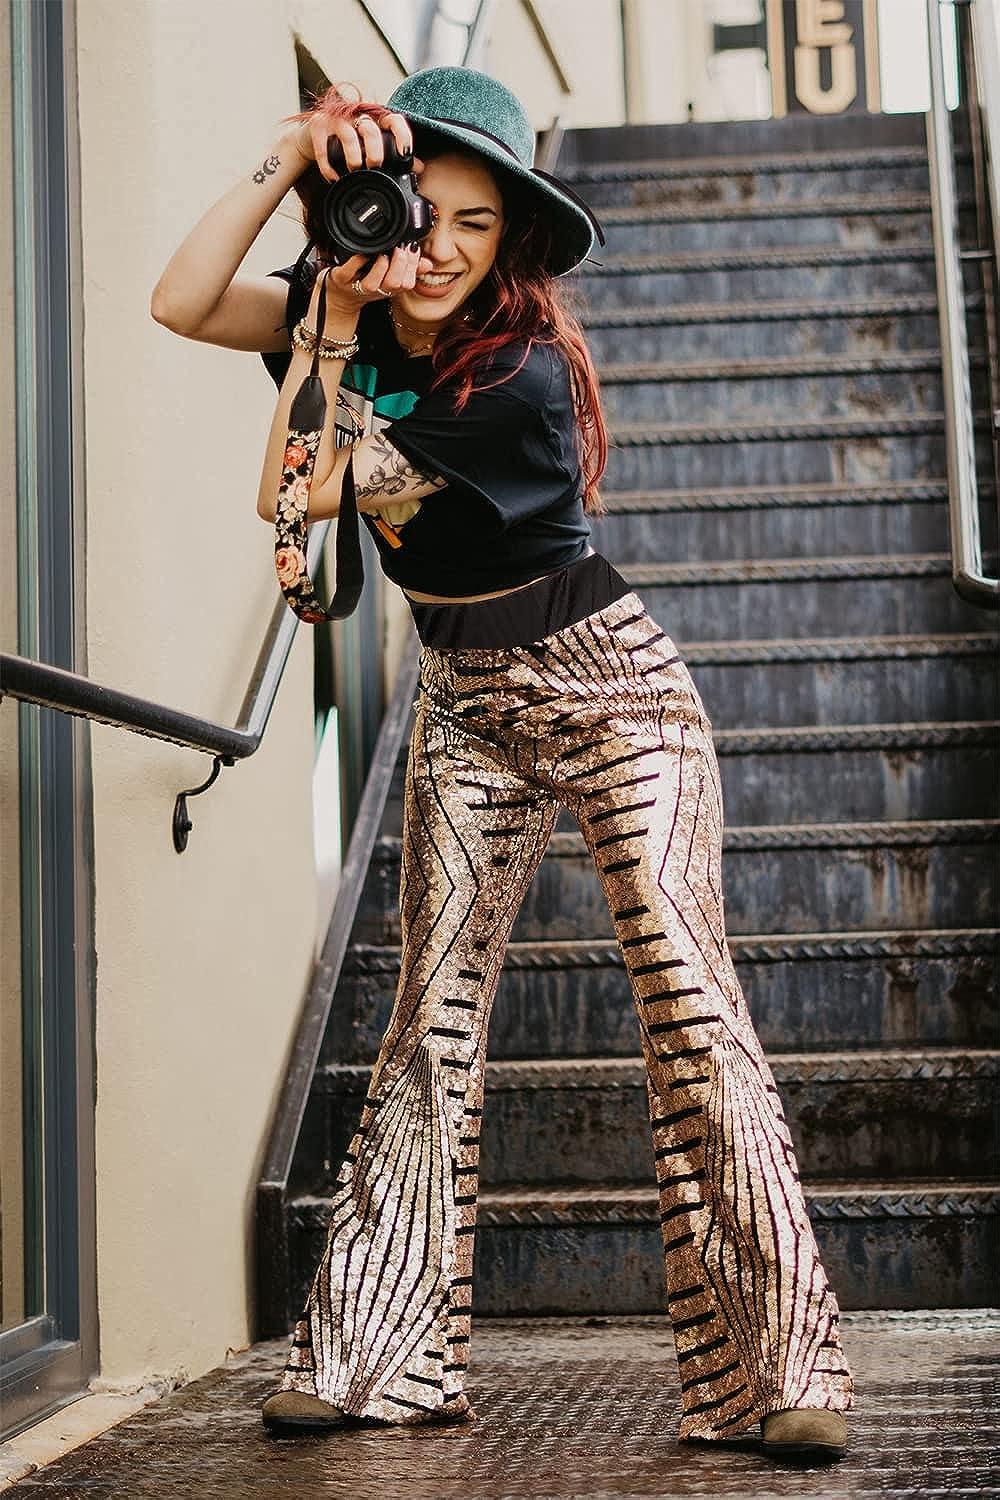 Stylish Sequin High Rise Flare Pants